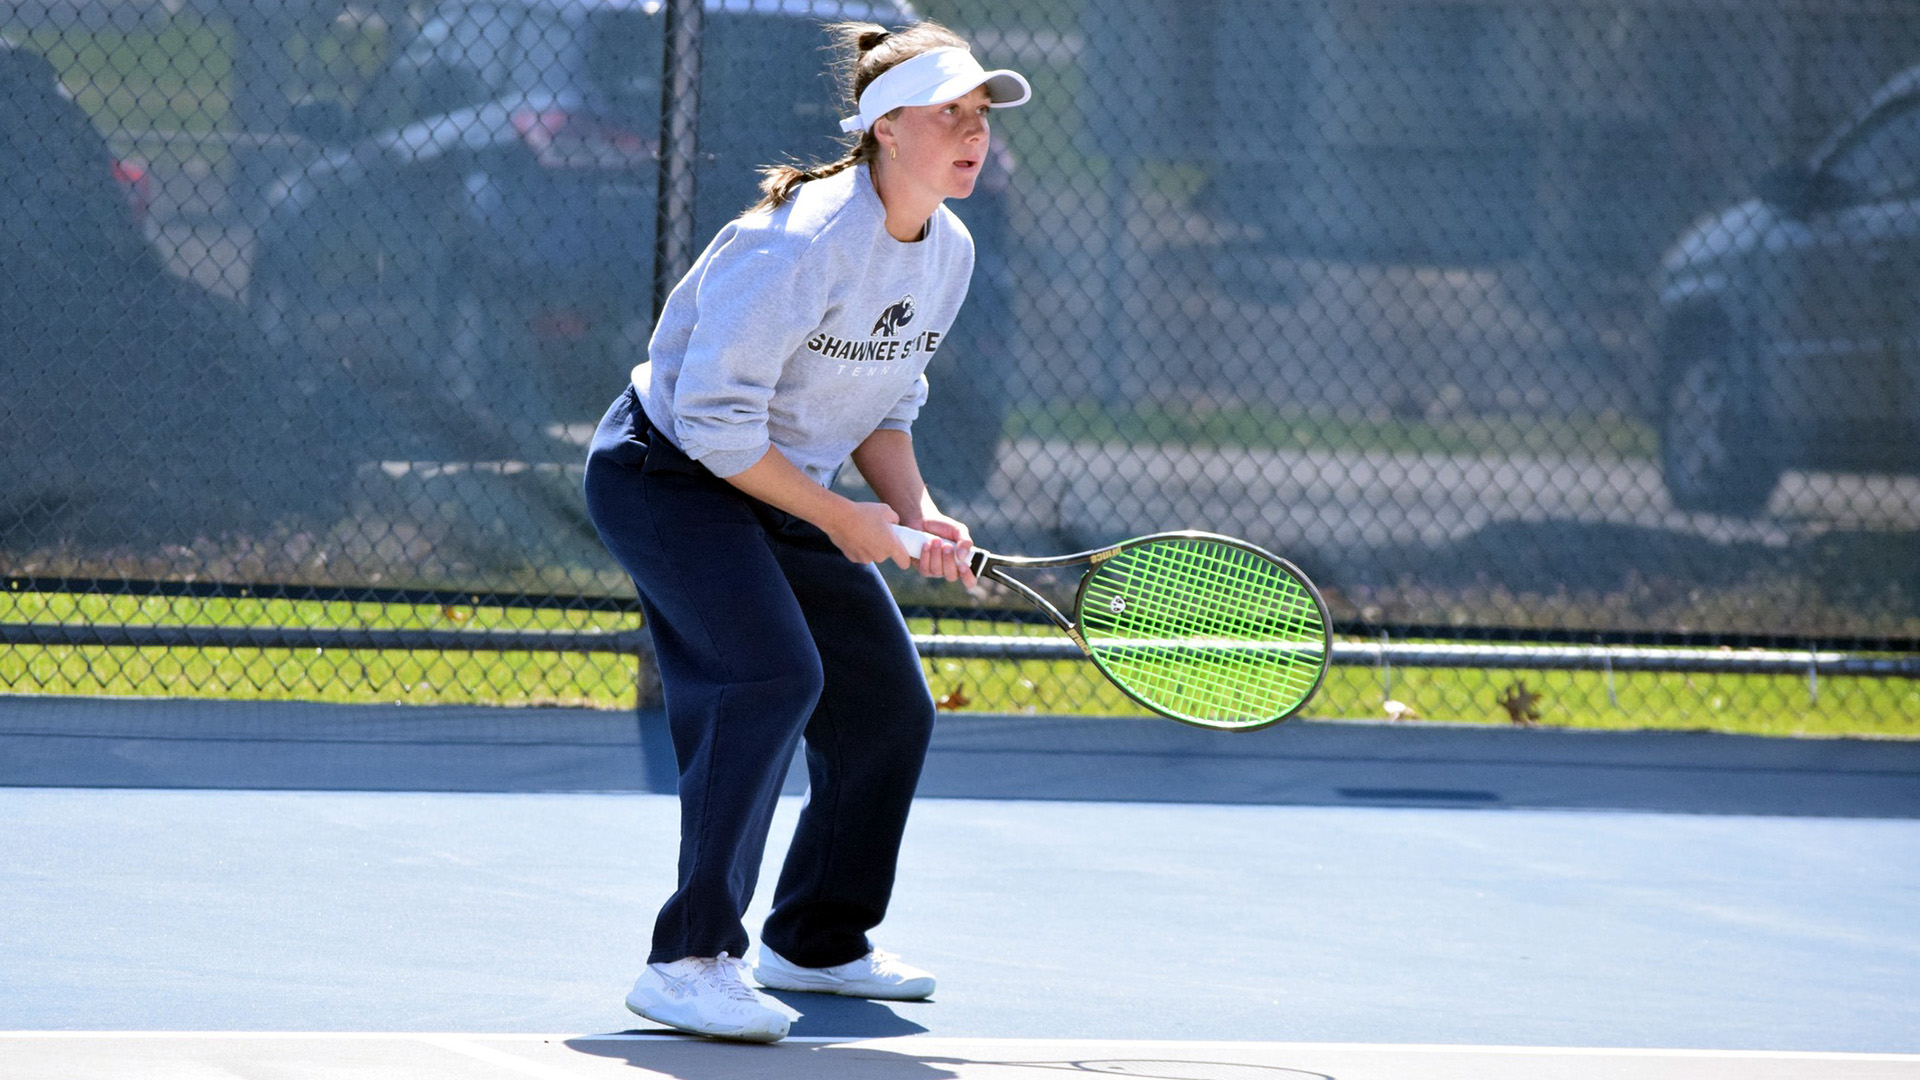 Urban picked for RSC Women's Tennis Player of the Week